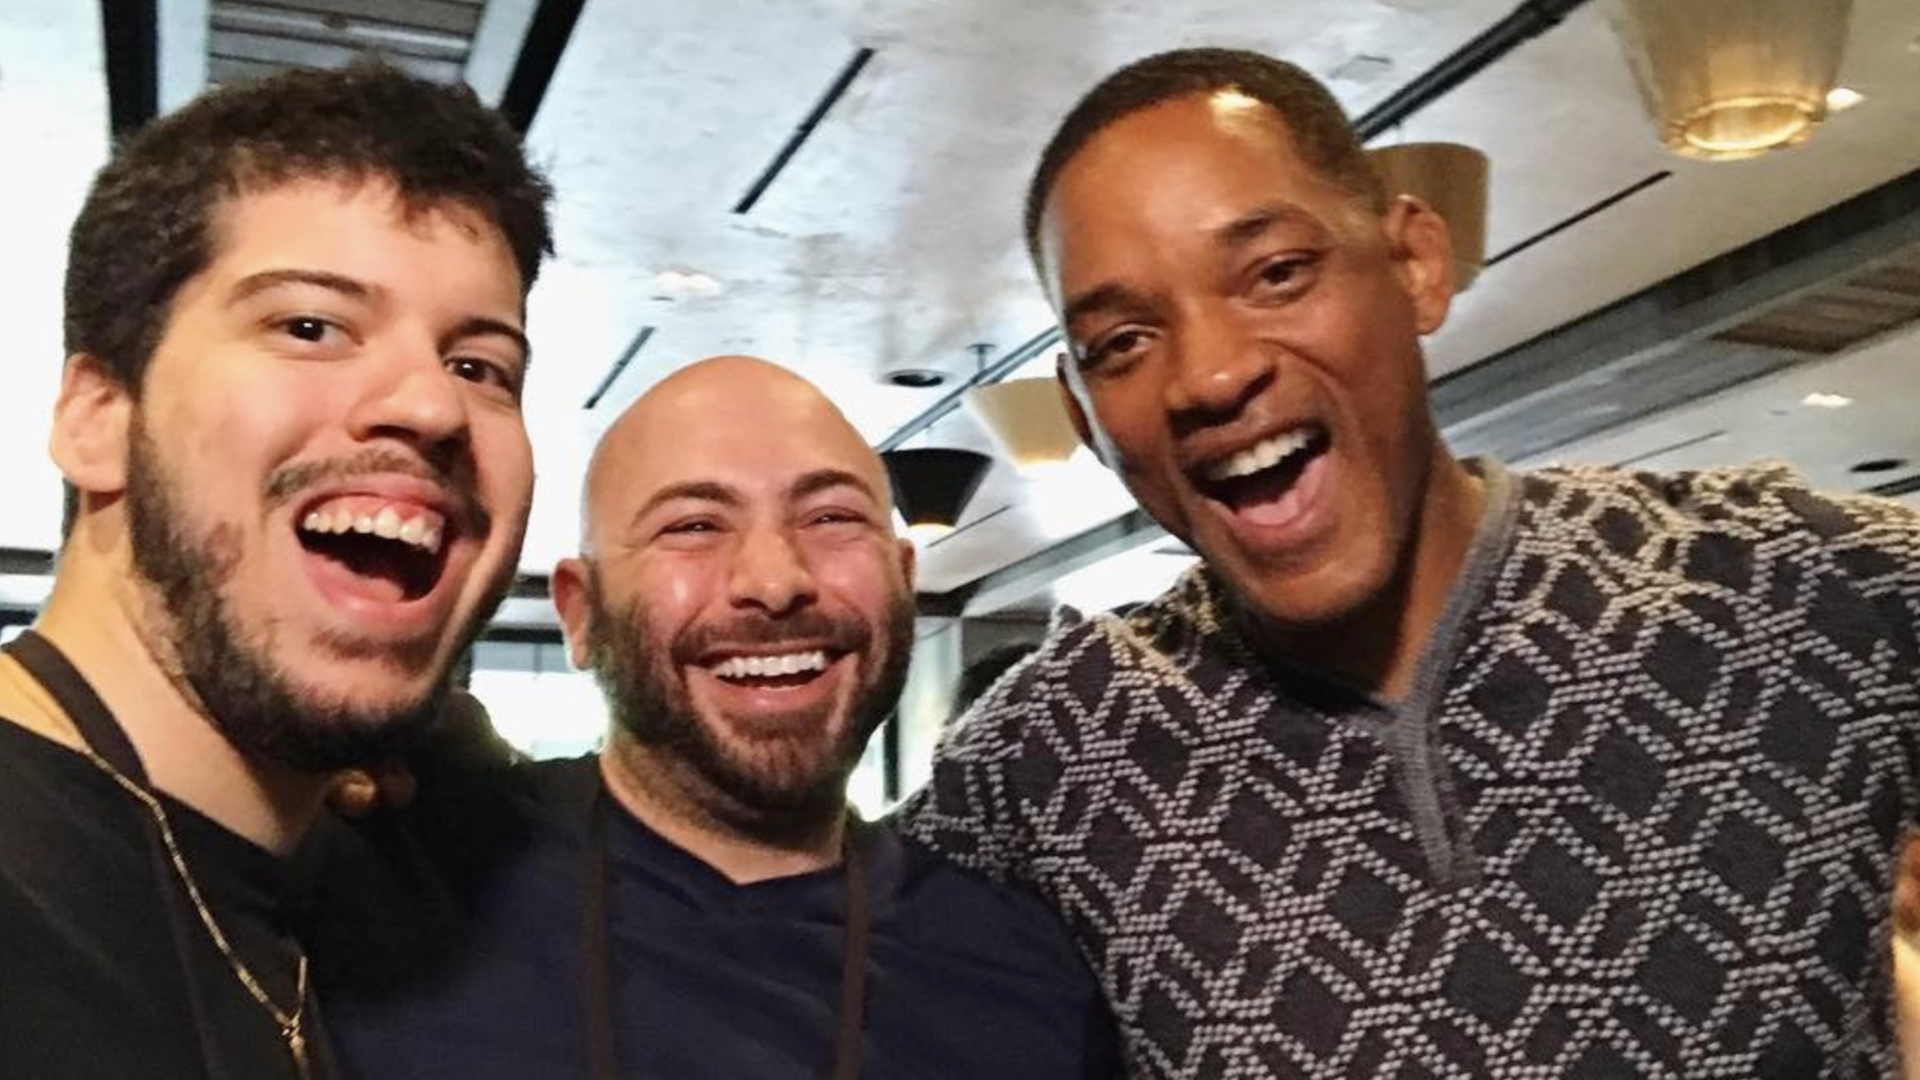 Typical Gamer with Will Smith